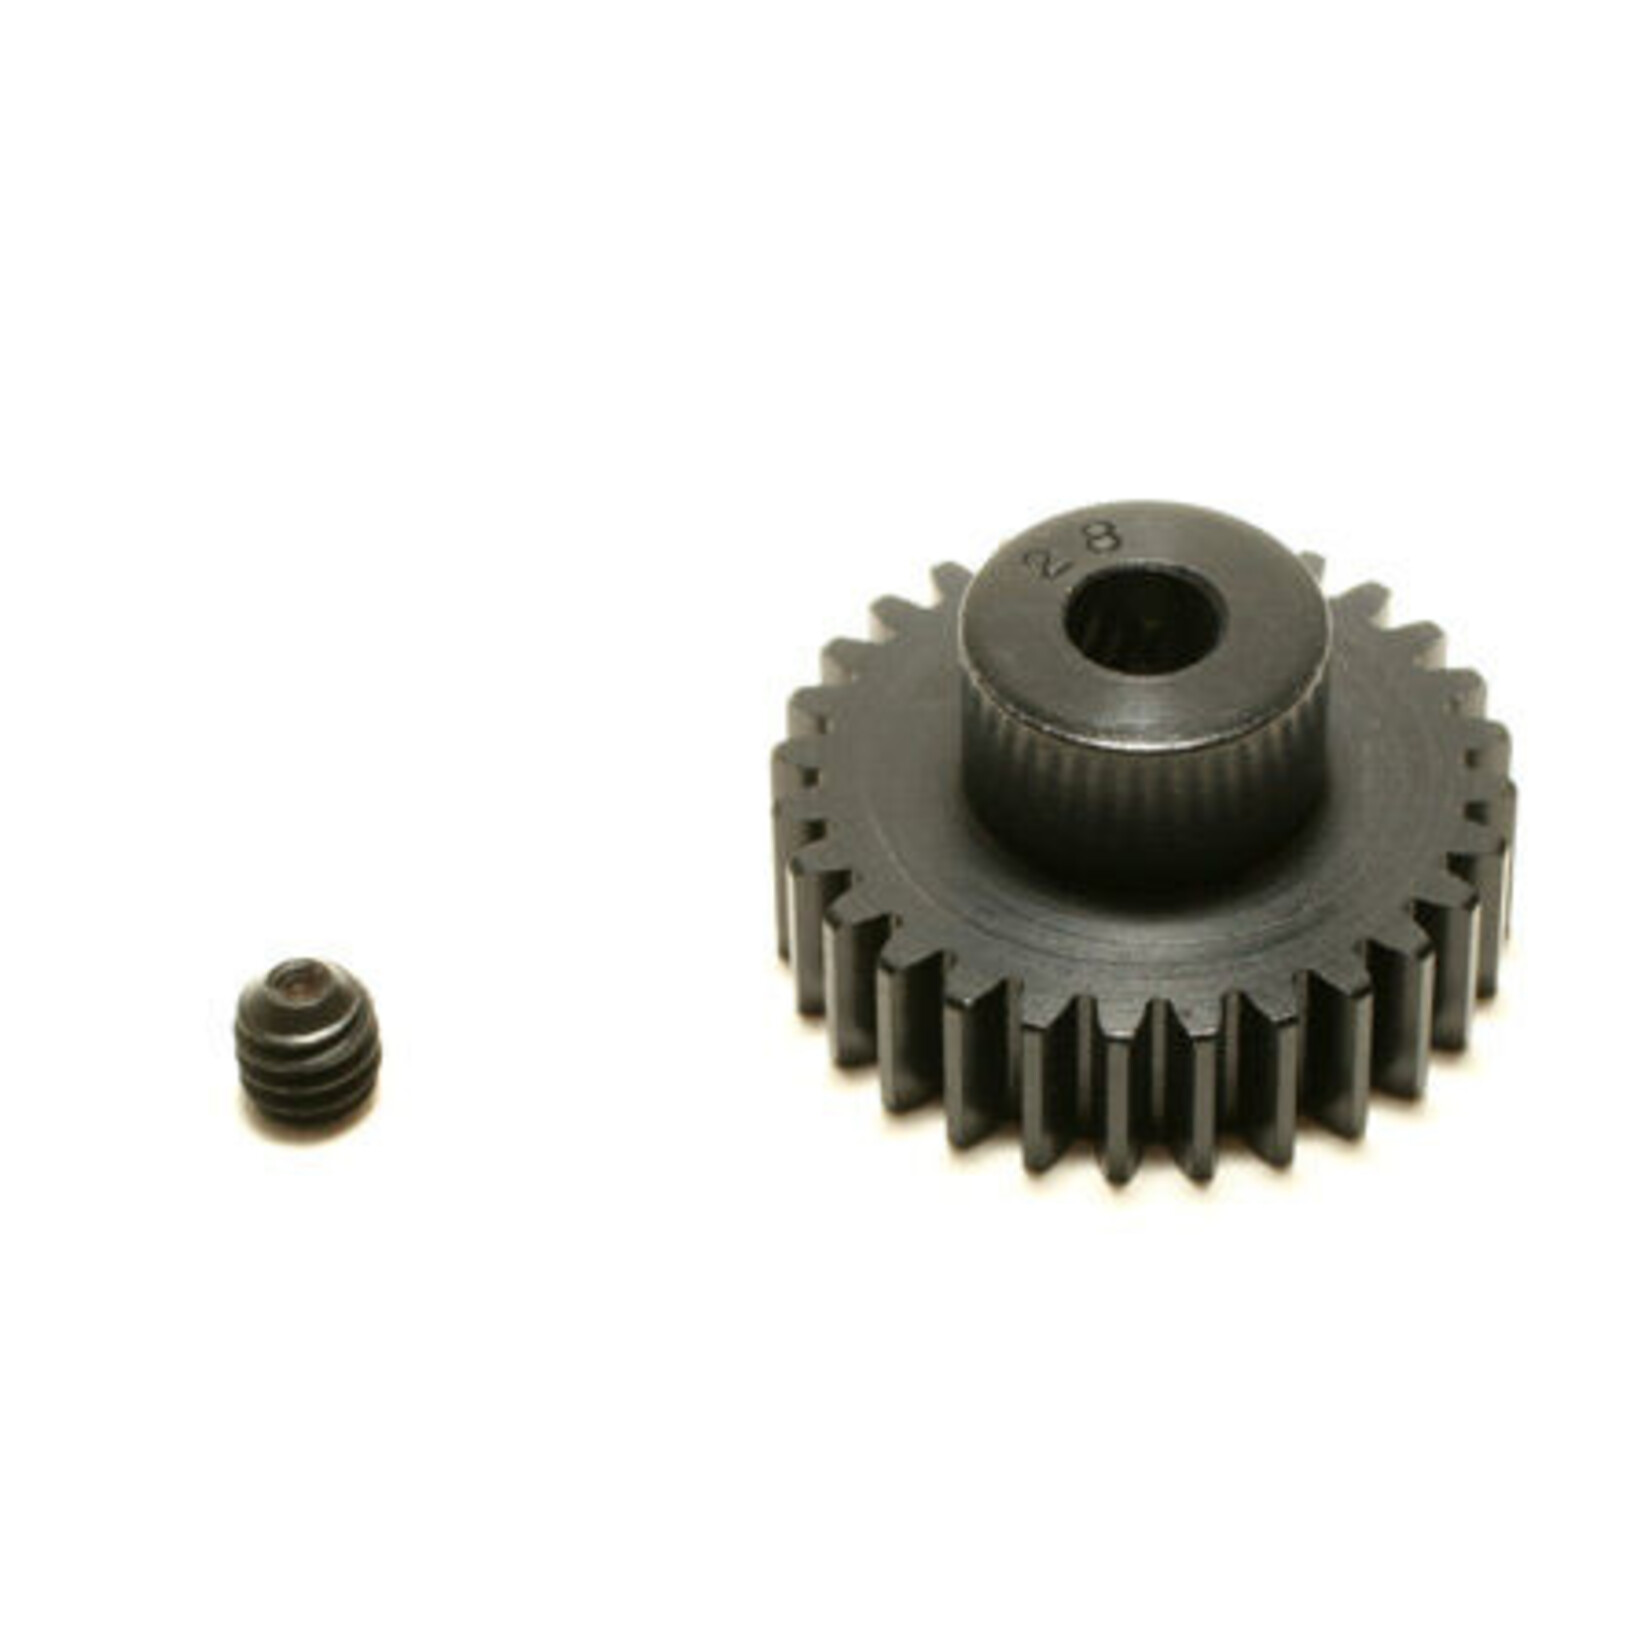 Robinson Racing Products (RRP) 48P Hard Coated Aluminum Pinion Gear, 28T